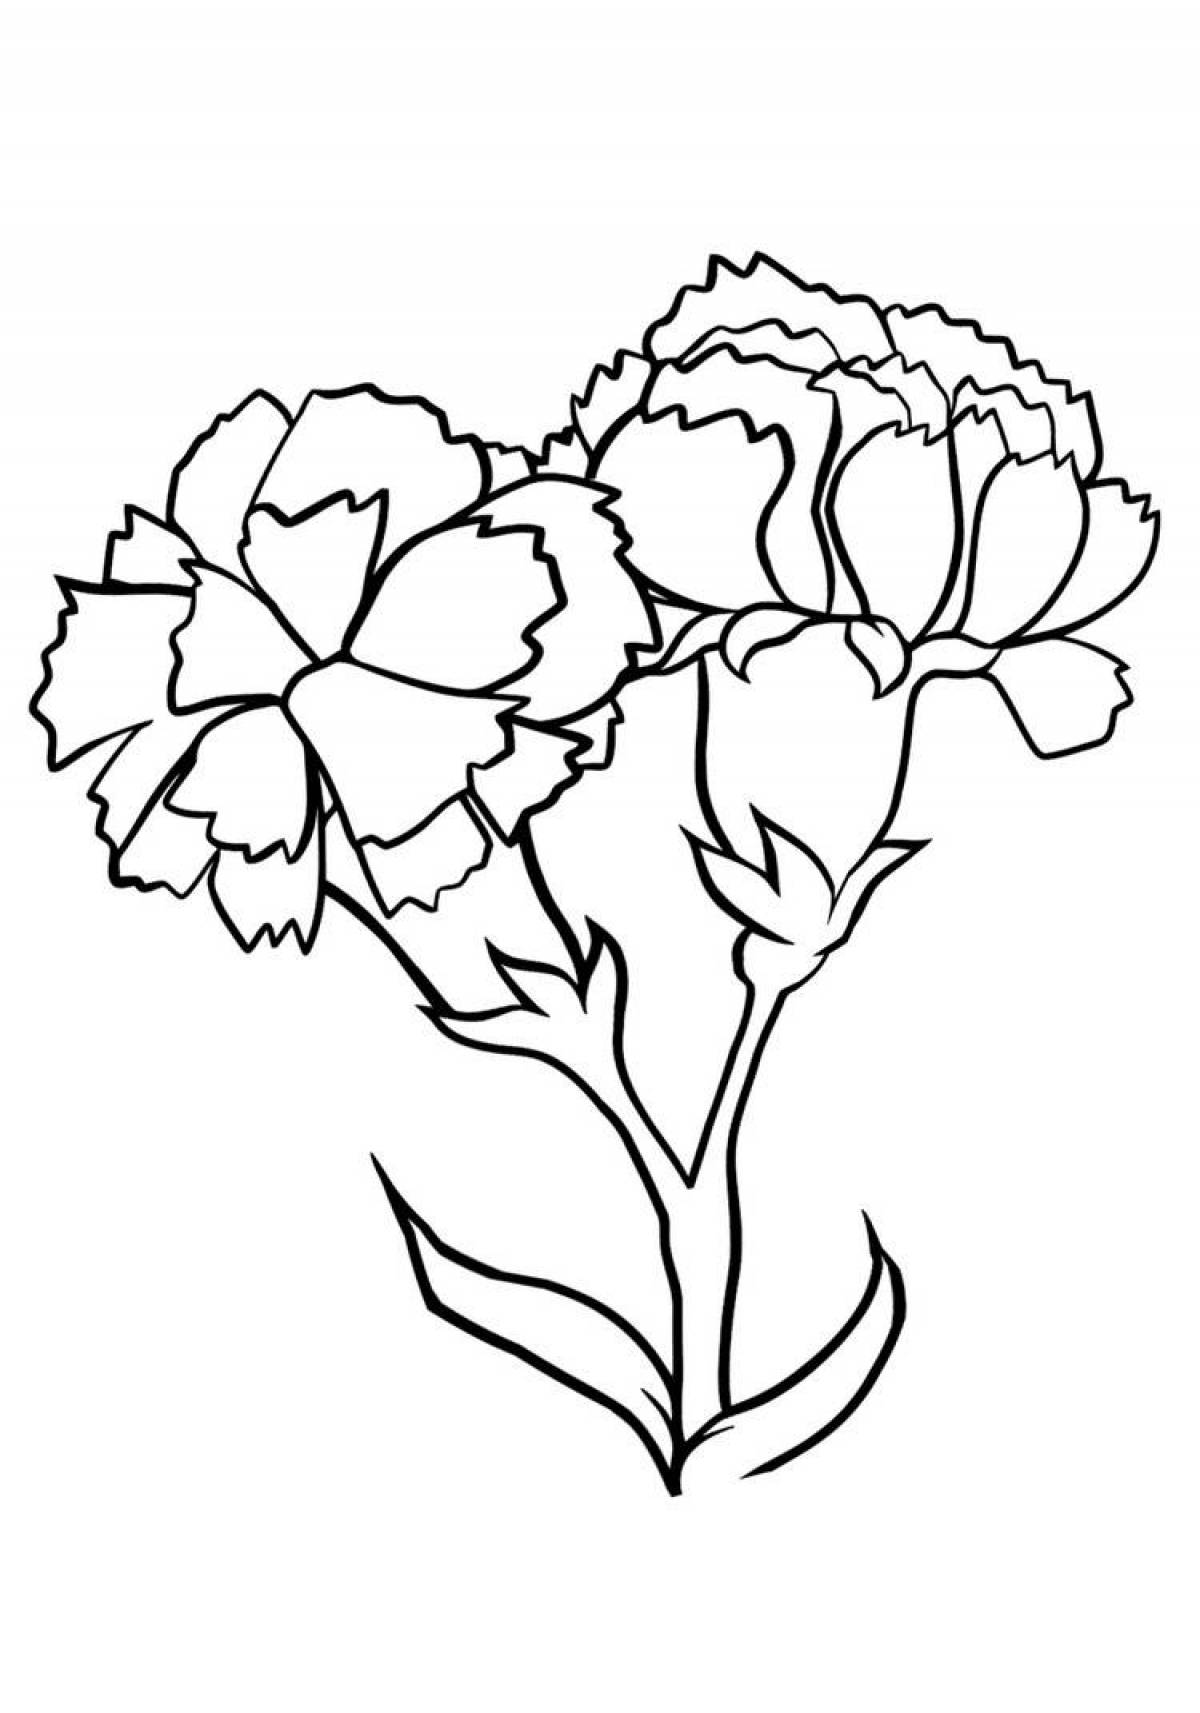 Exciting carnation coloring for students